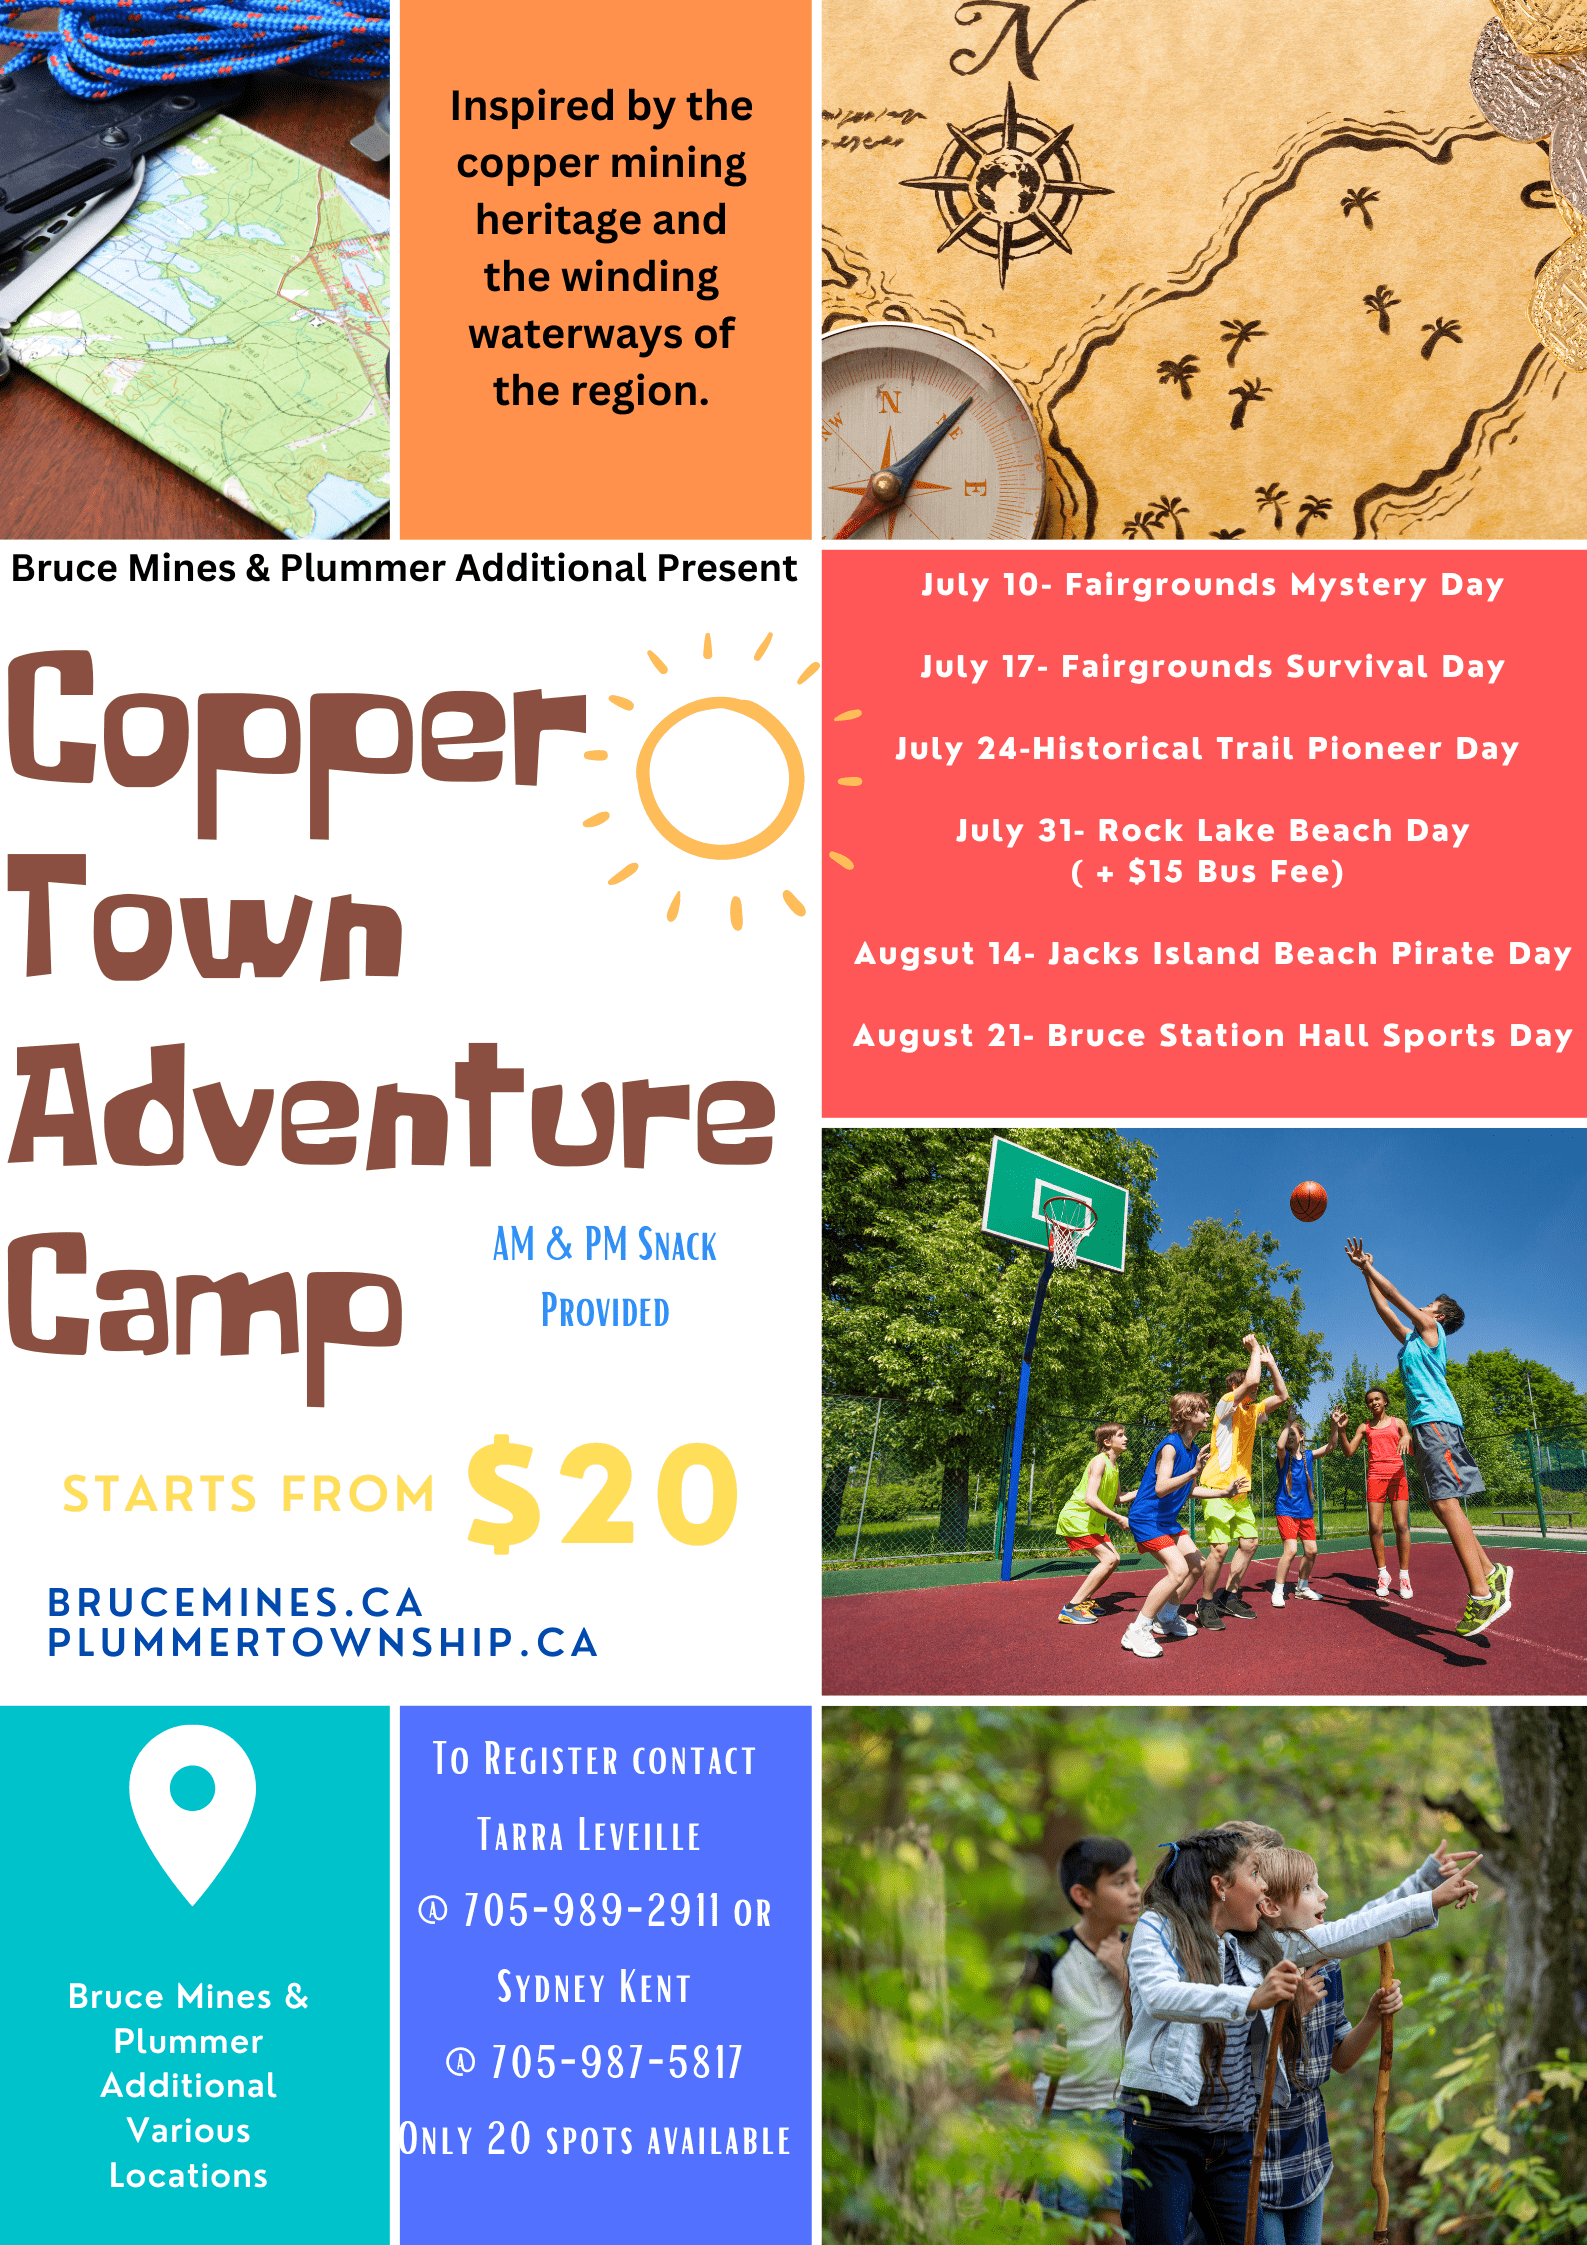 Copper Town Adventure Camp - August 14